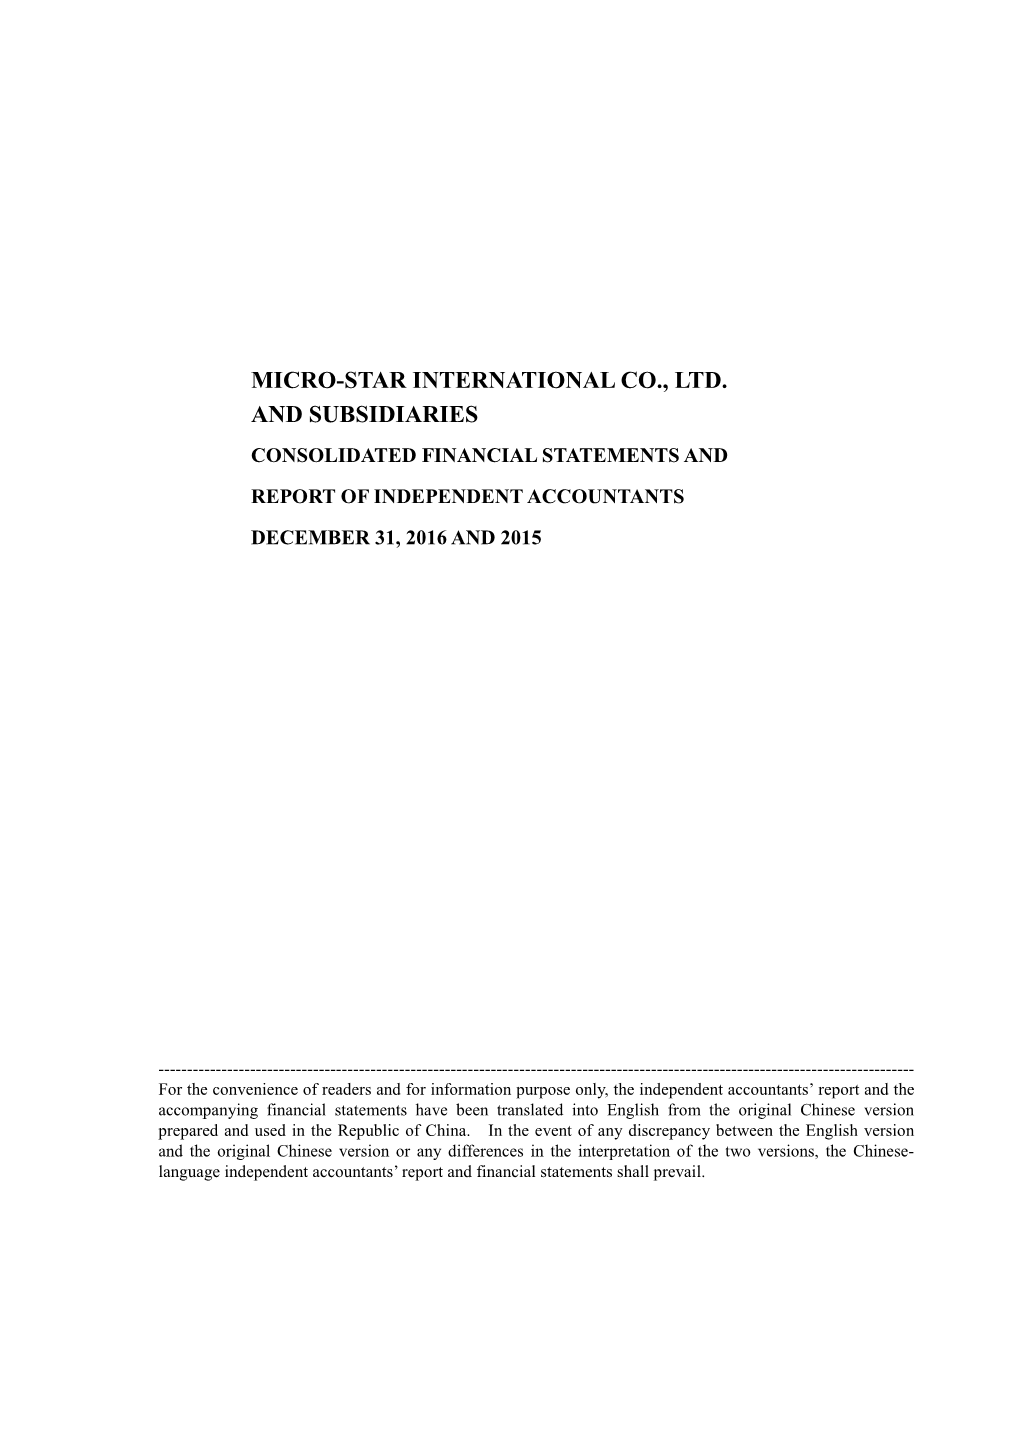 Micro-Star International Co., Ltd. and Subsidiaries Consolidated Financial Statements and Report of Independent Accountants December 31, 2016 and 2015